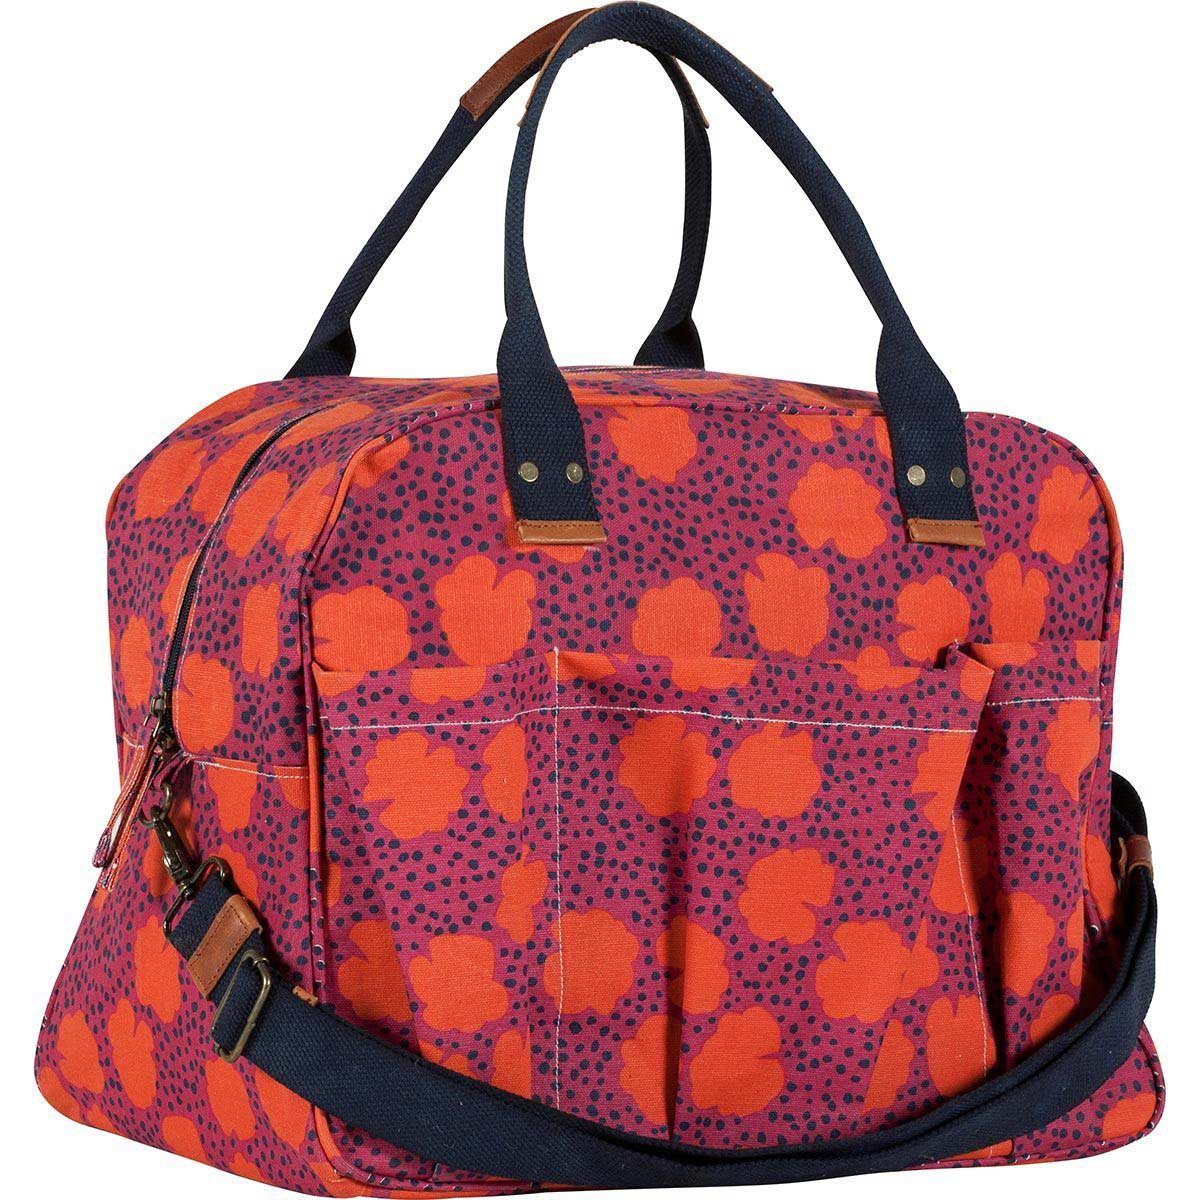 red and purple floral print overnighter tote bag